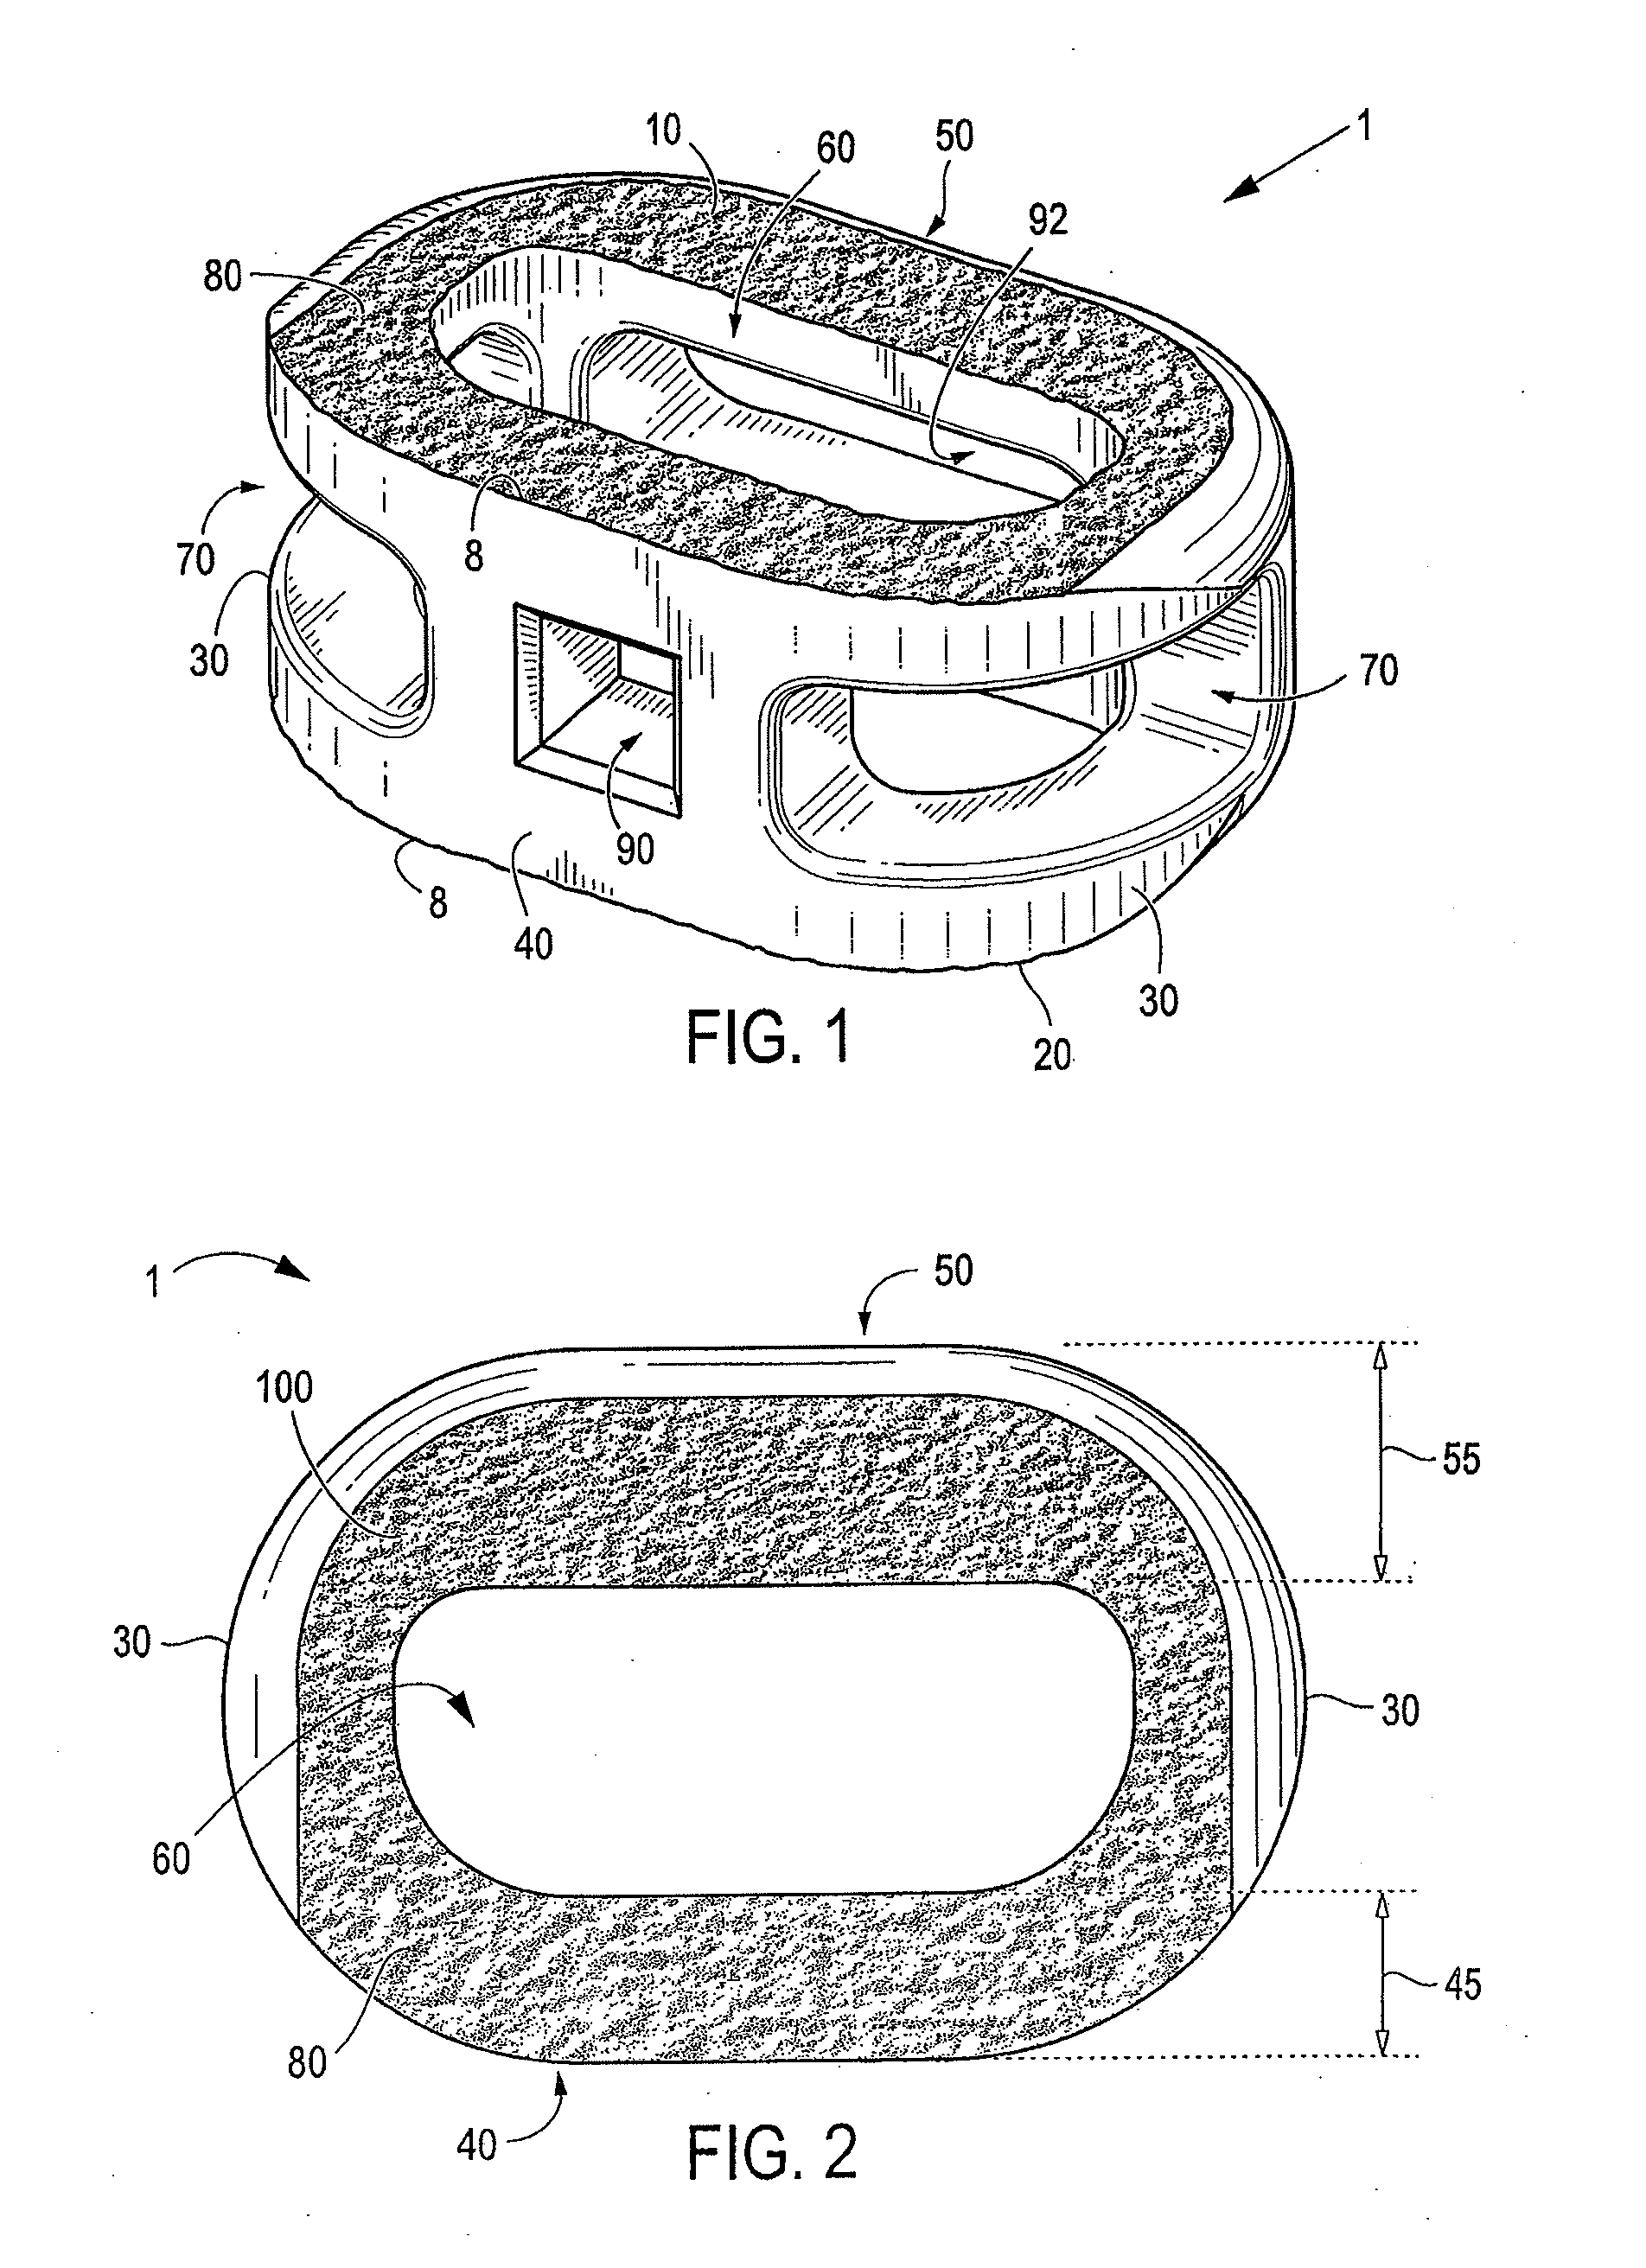 Method of using instruments and interbody spinal implants to enhance distraction